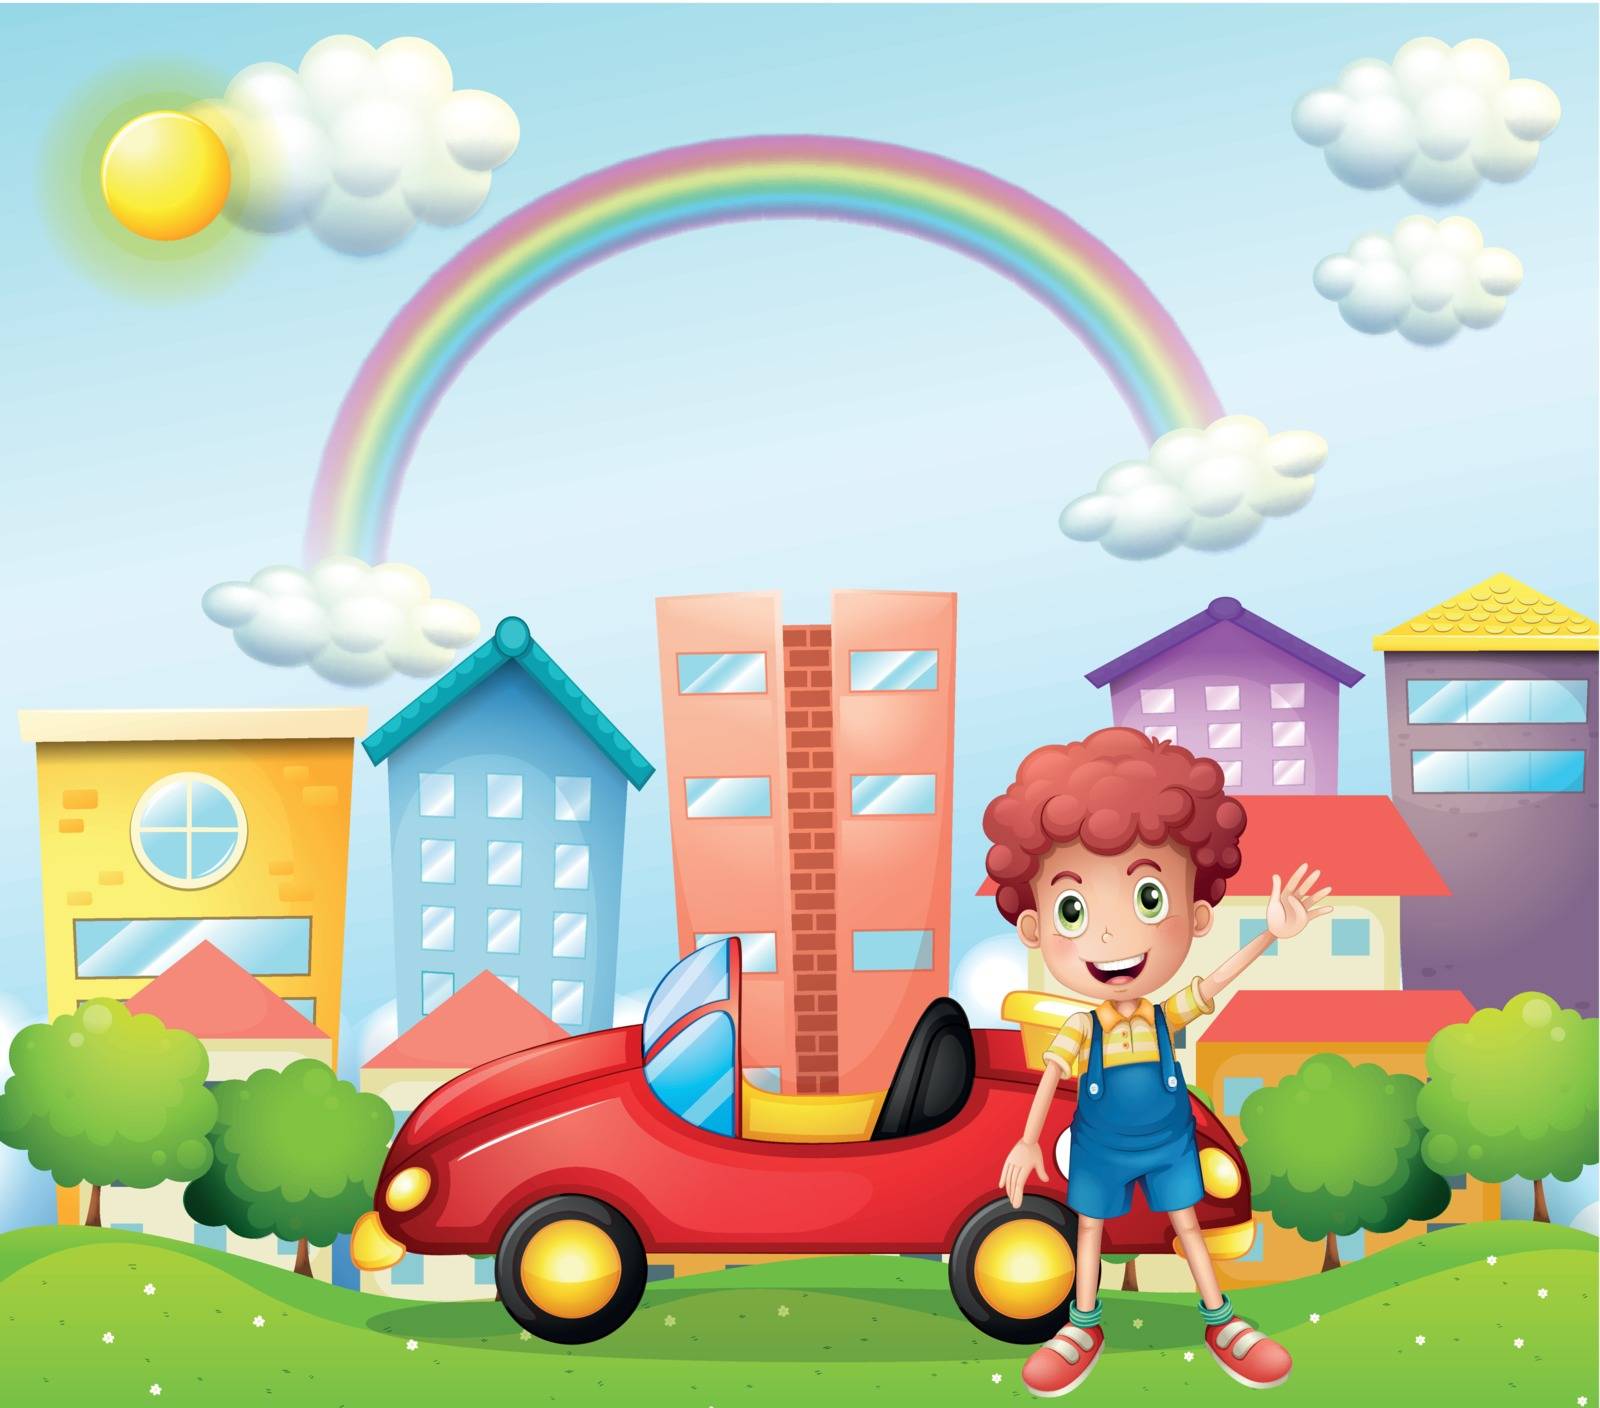 Illustration of a boy and his red car near the high buildings